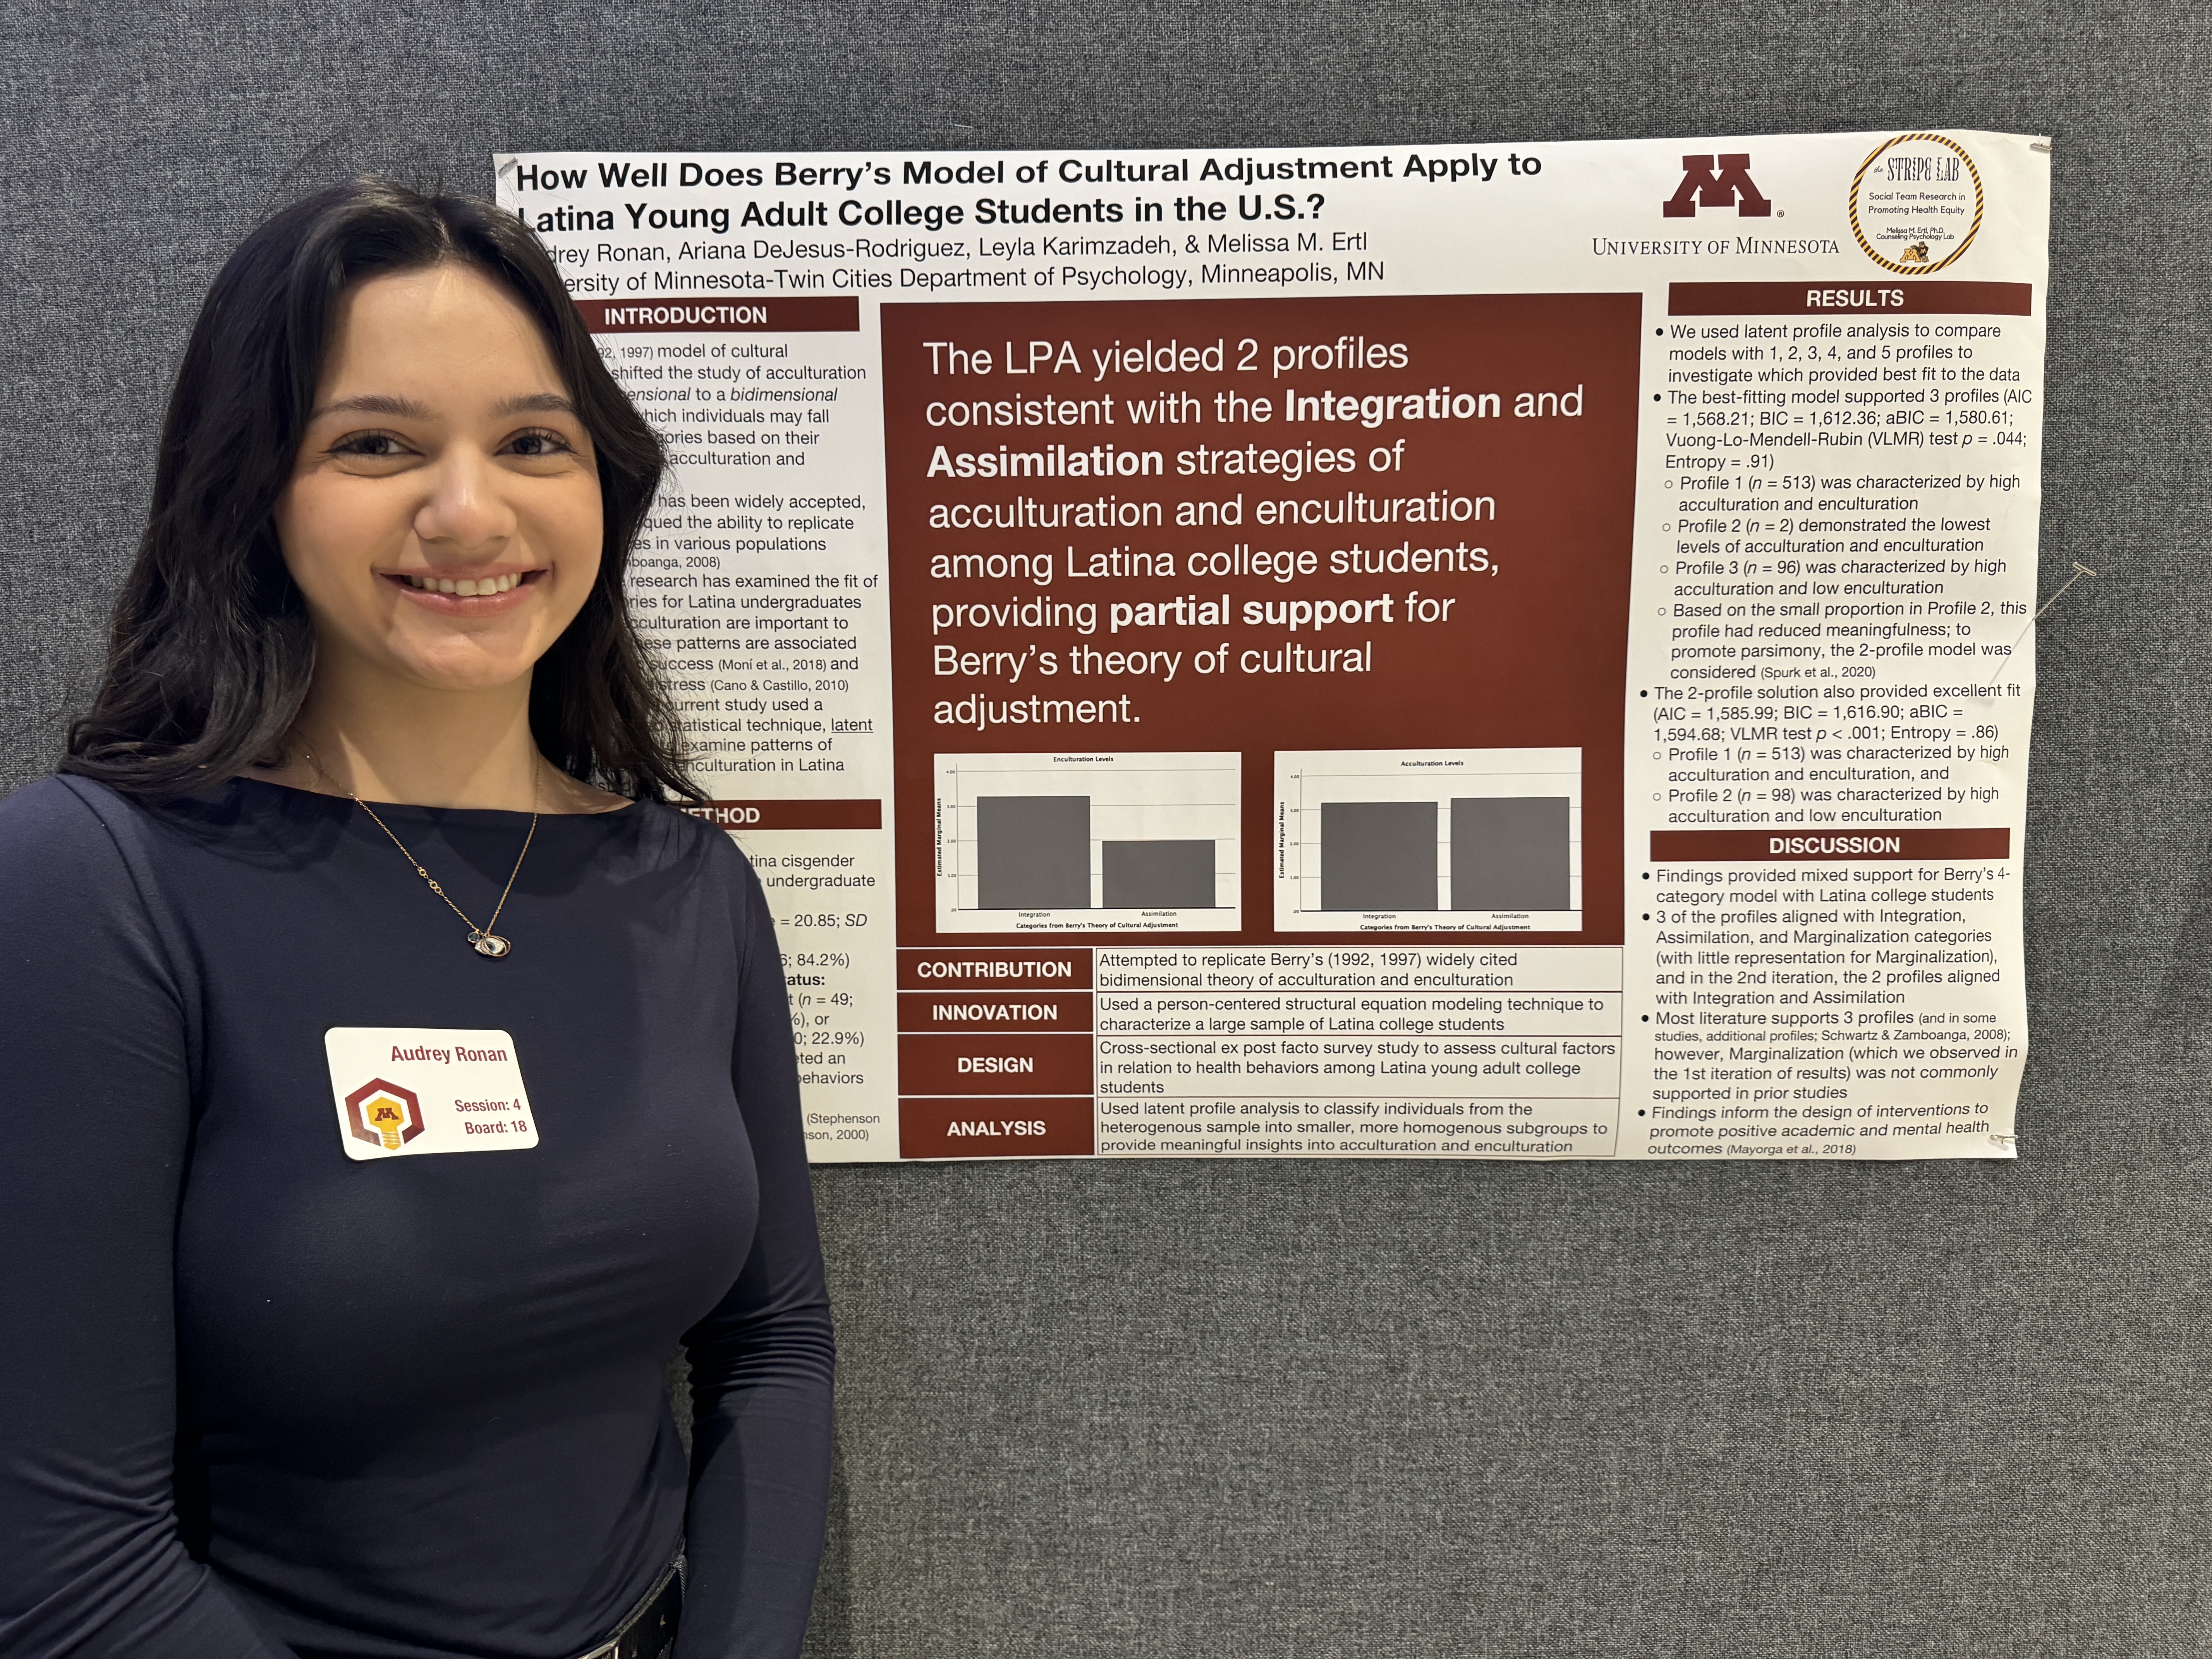 Audrey Ronan presents her research on cultural adjustment strategies, including acculturation and enculturation processes in Latina college students.